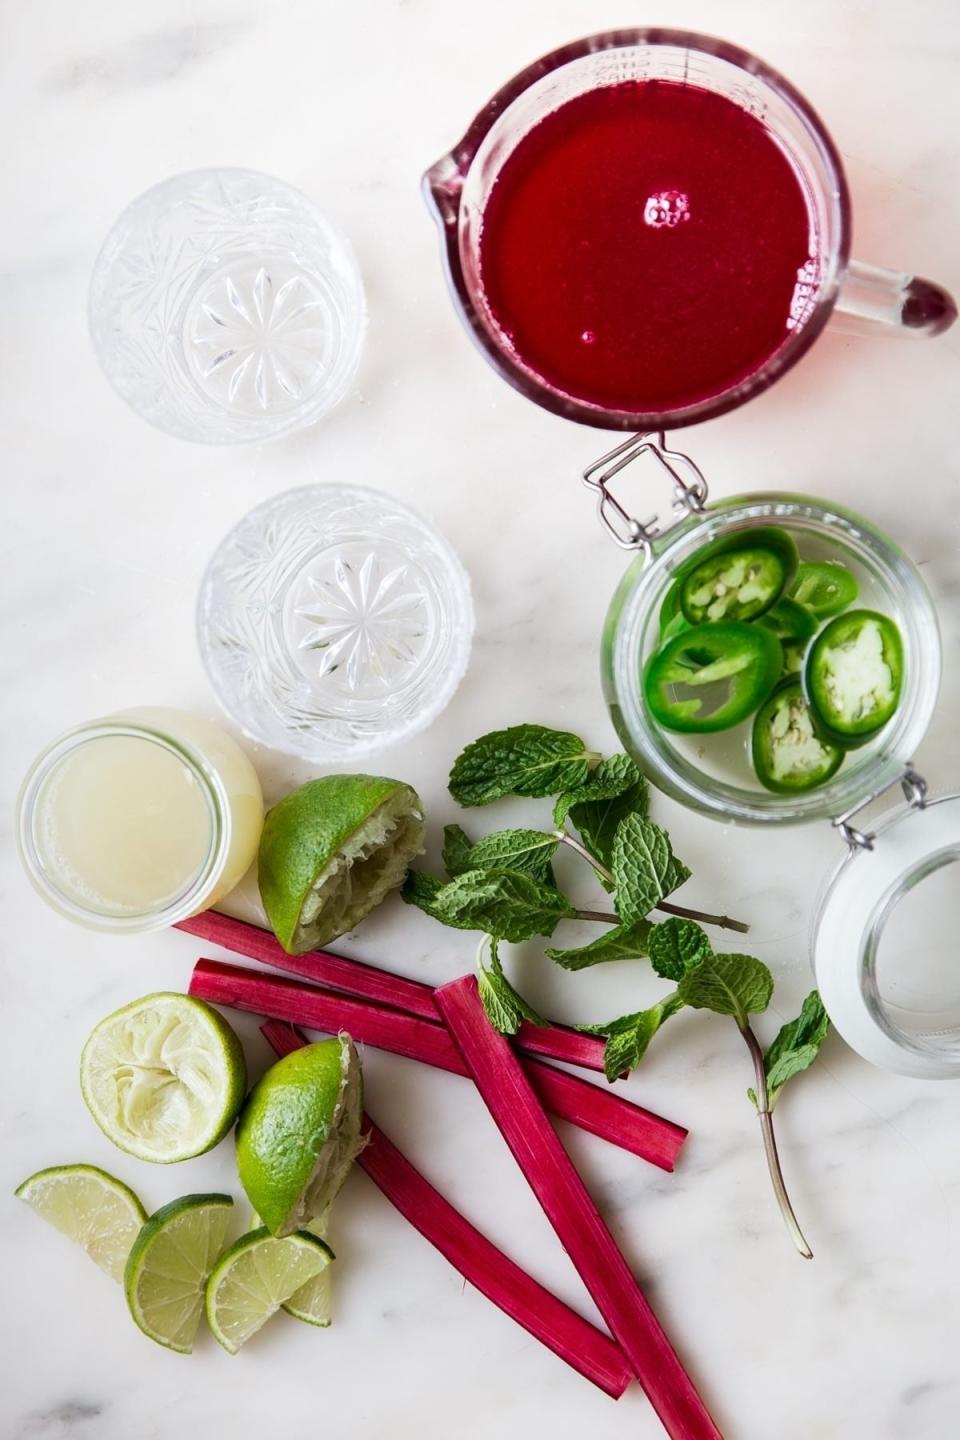 Assorted ingredients for a cocktail including lime, mint, jalapeno, and rhubarb on a marble surface